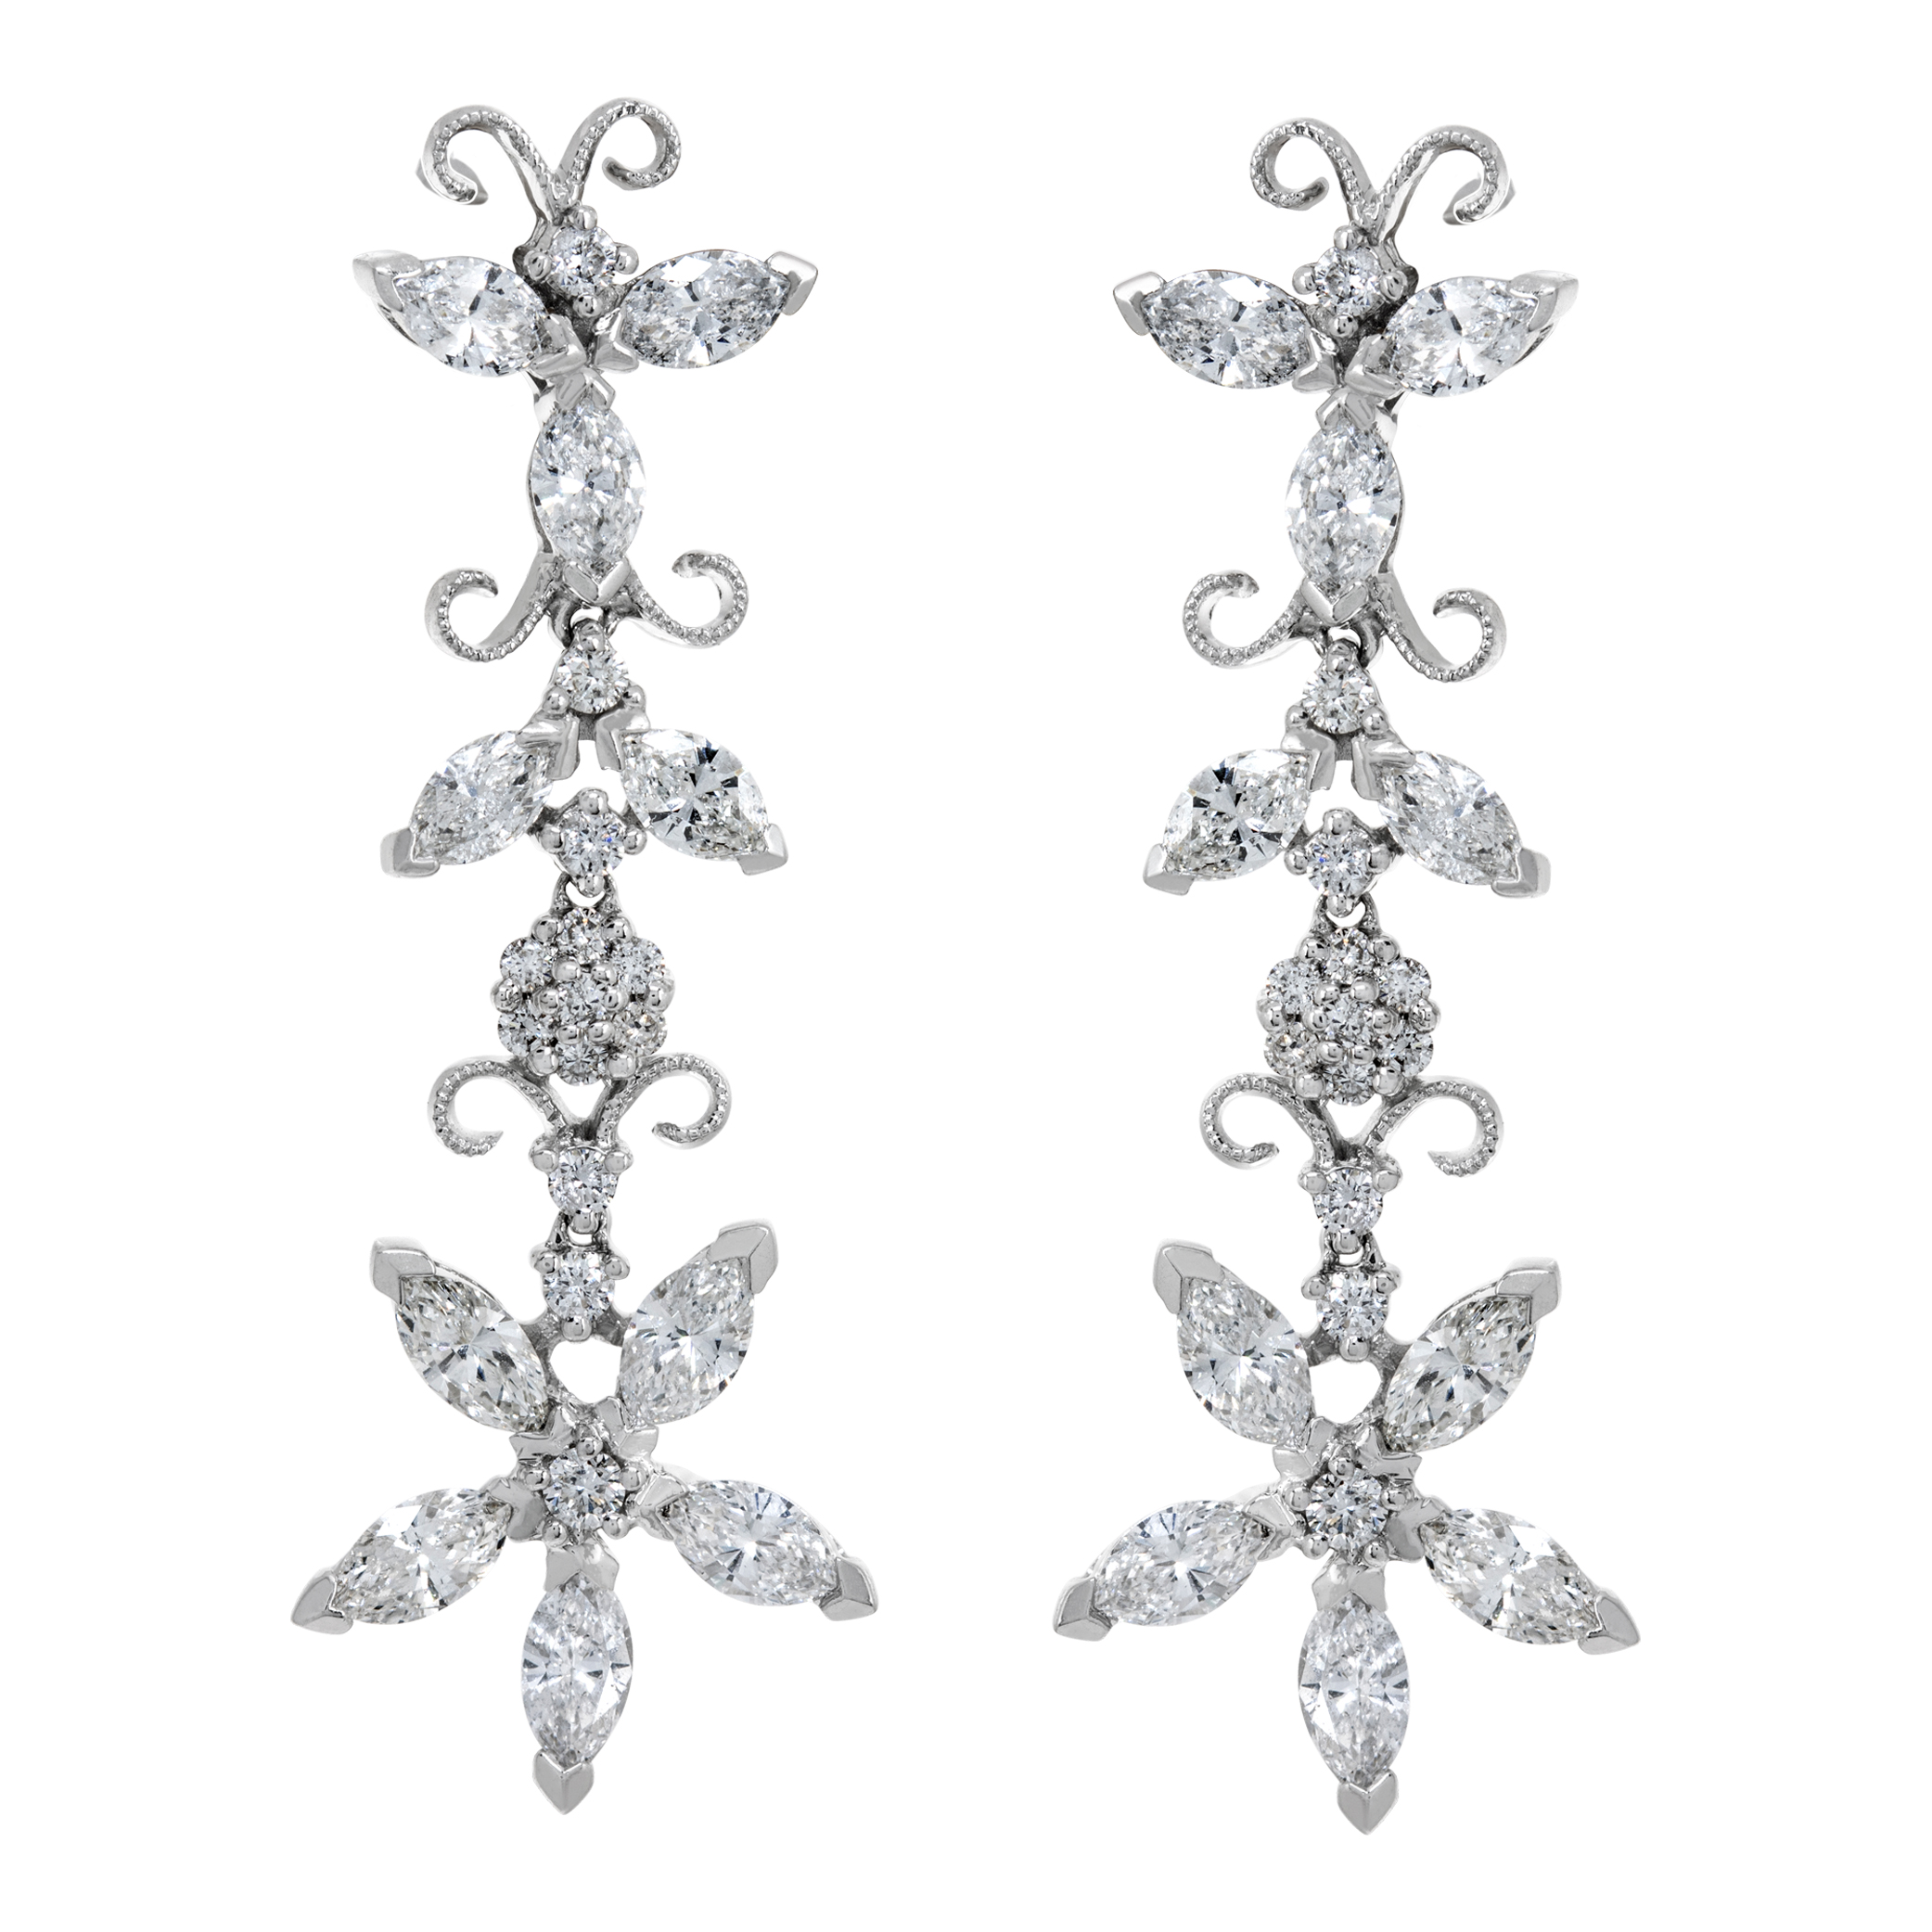 Flower design marquise & round diamond earrings in 14k white gold, 4.29 carats (Stones)